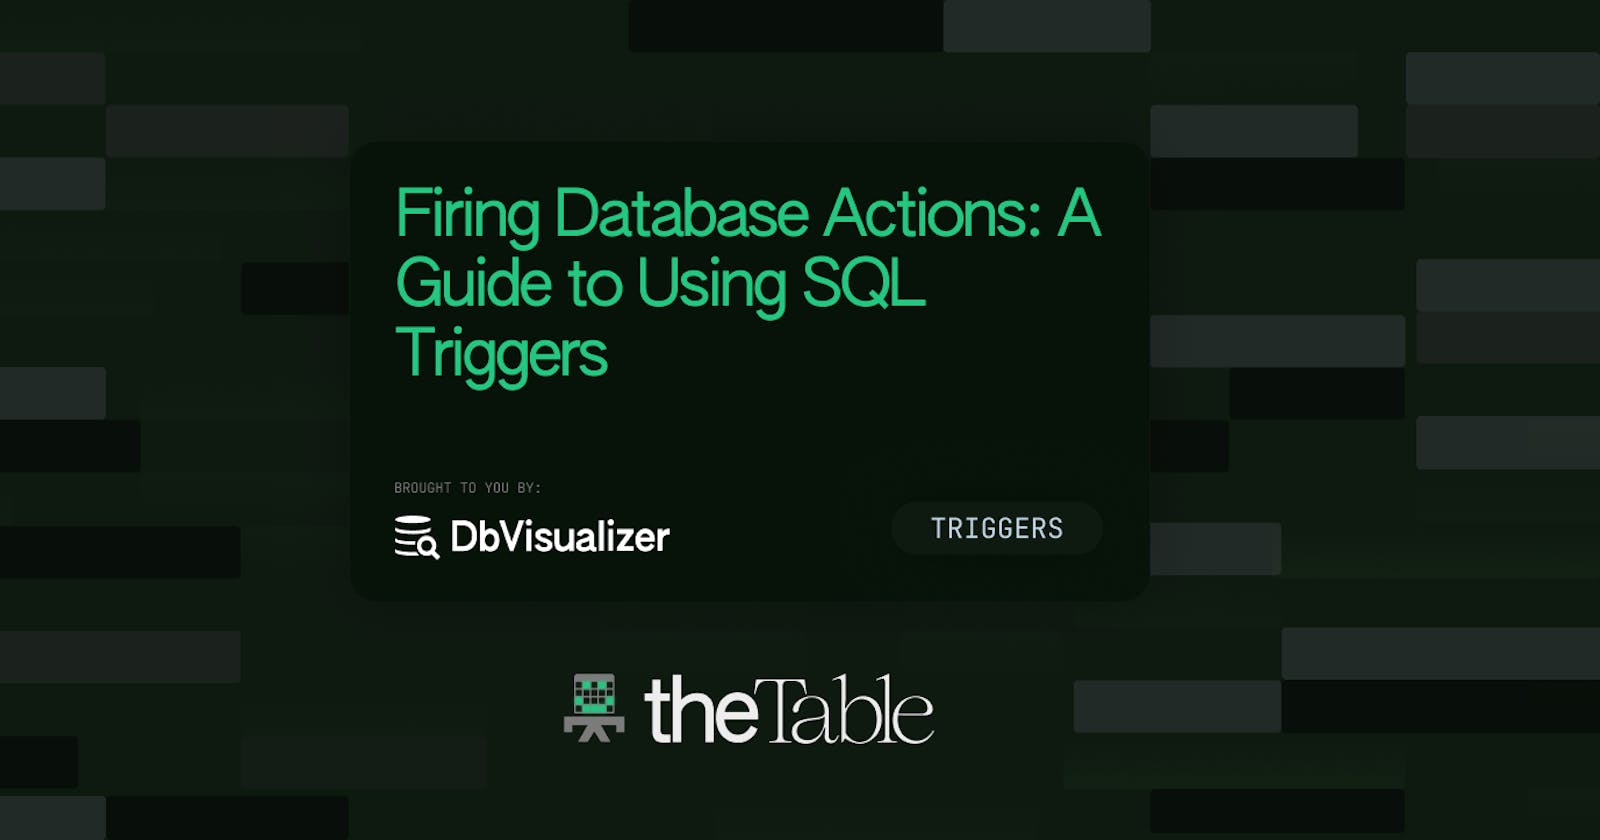 Firing Database Actions: A Guide to Using SQL Triggers with DbVisualizer